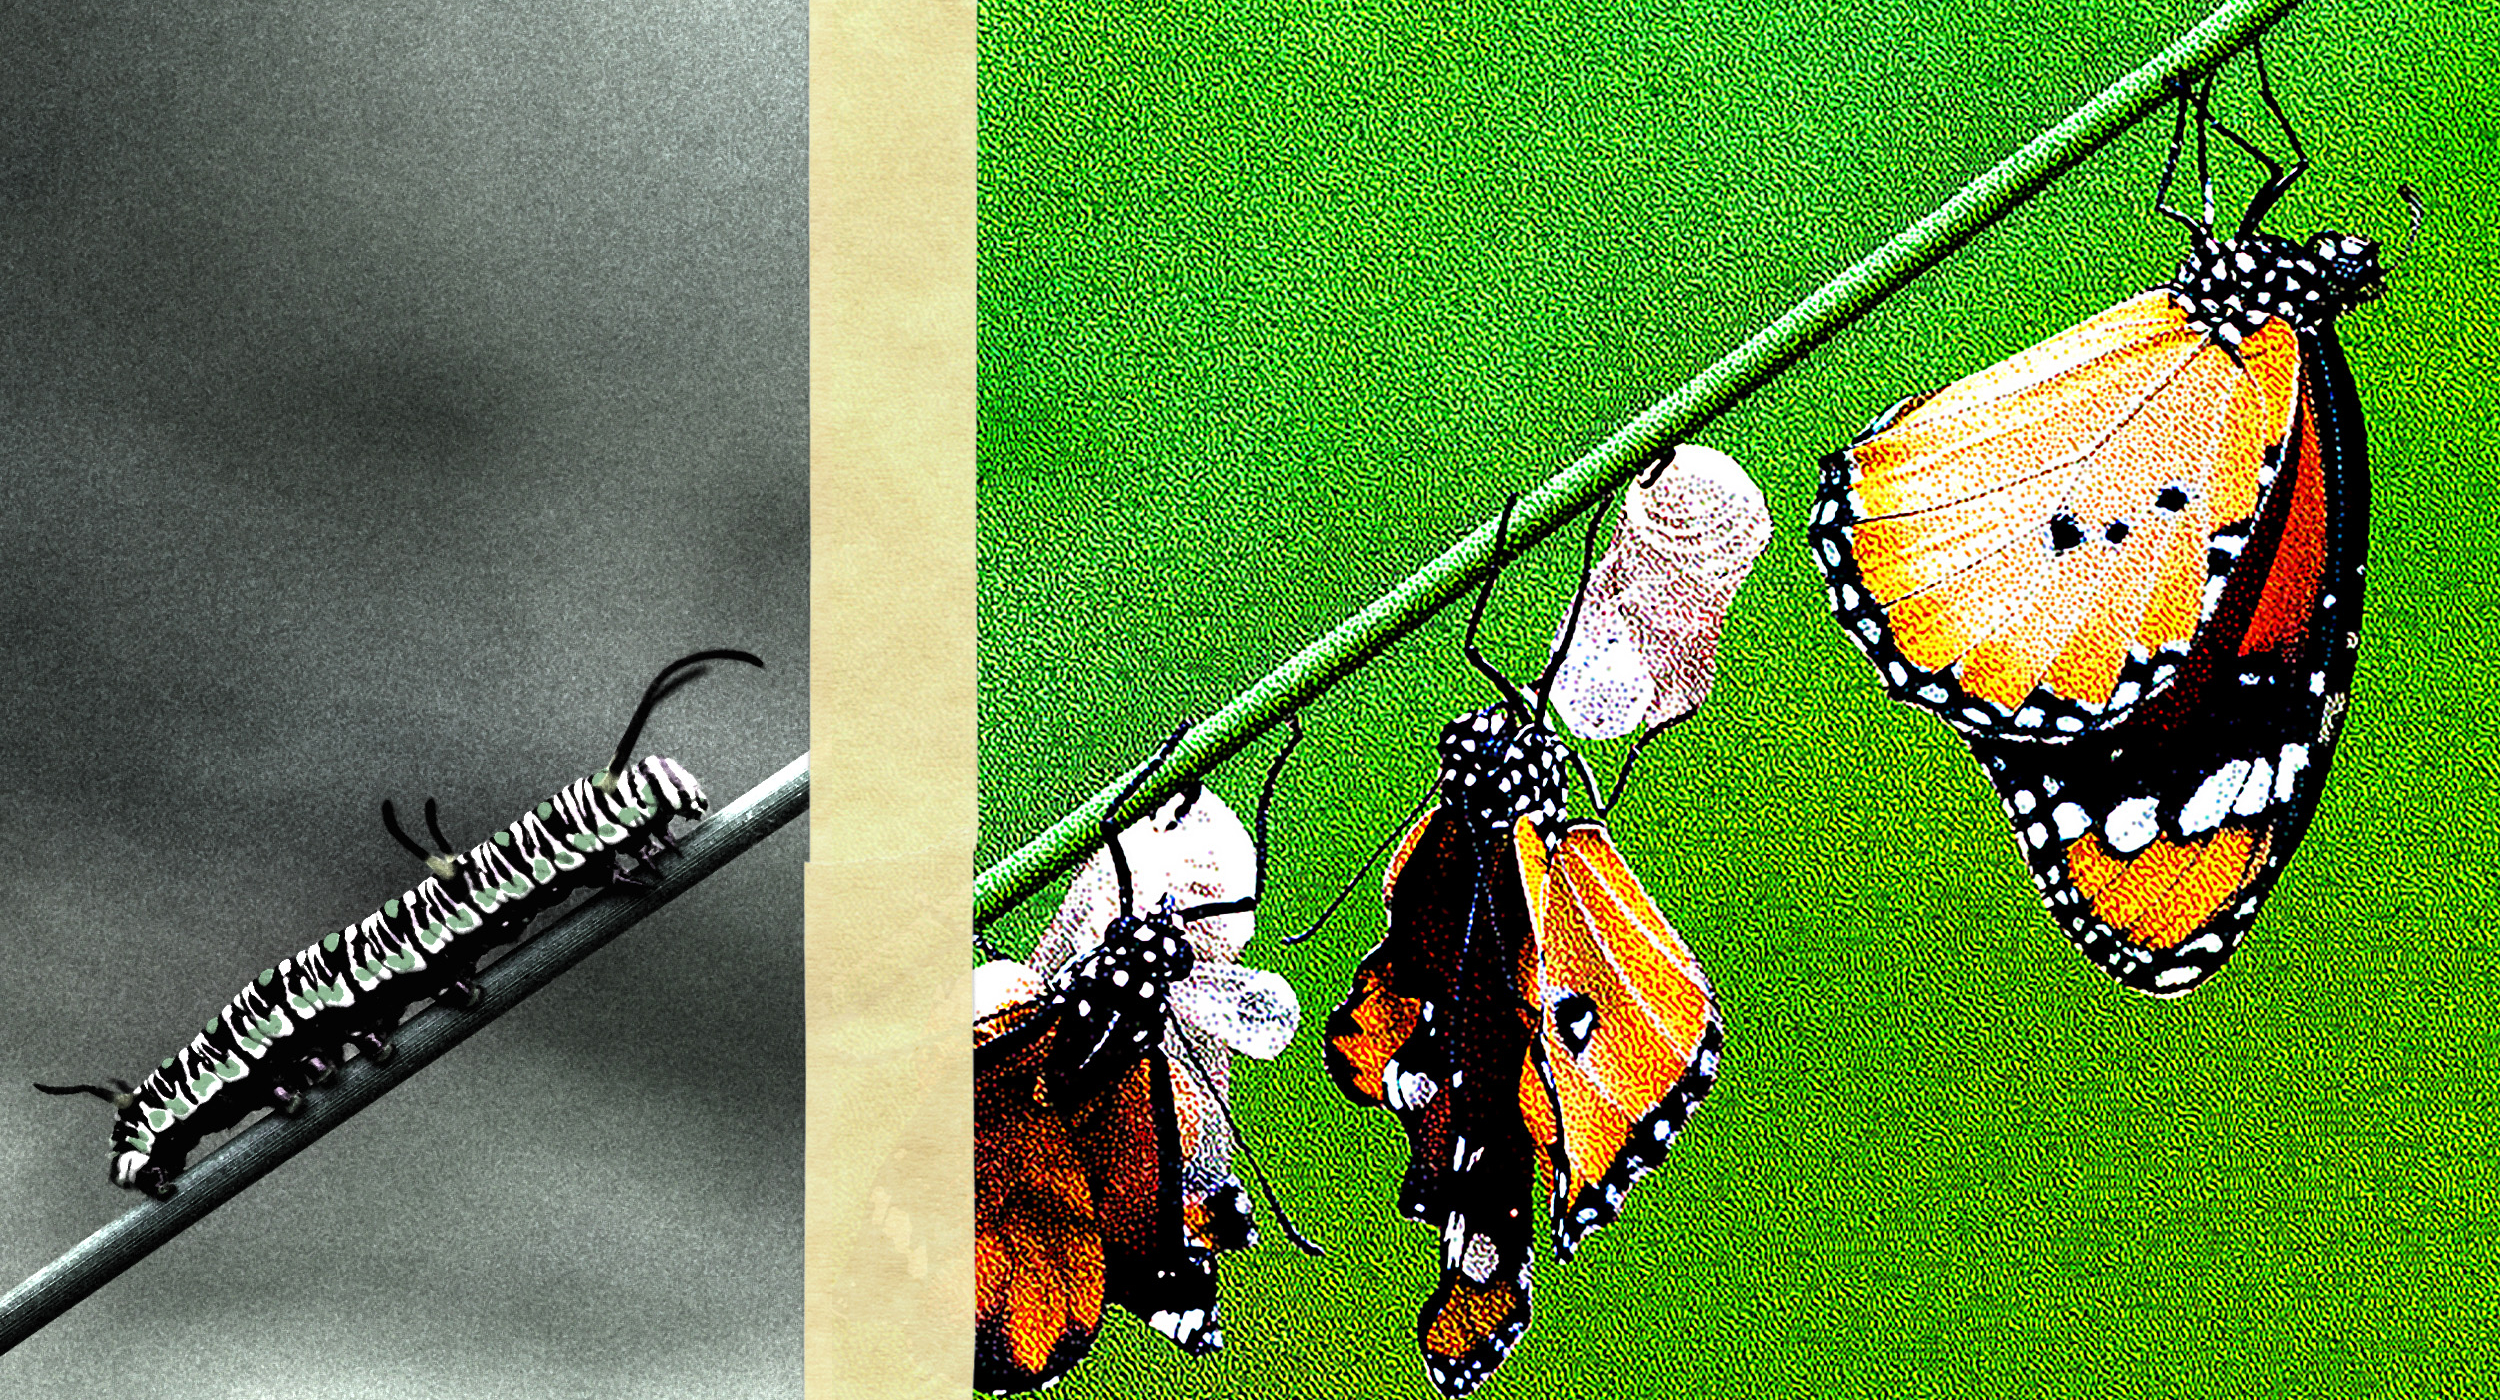 A picture showcasing the transformation from caterpillar to butterfly, potential unlocked.